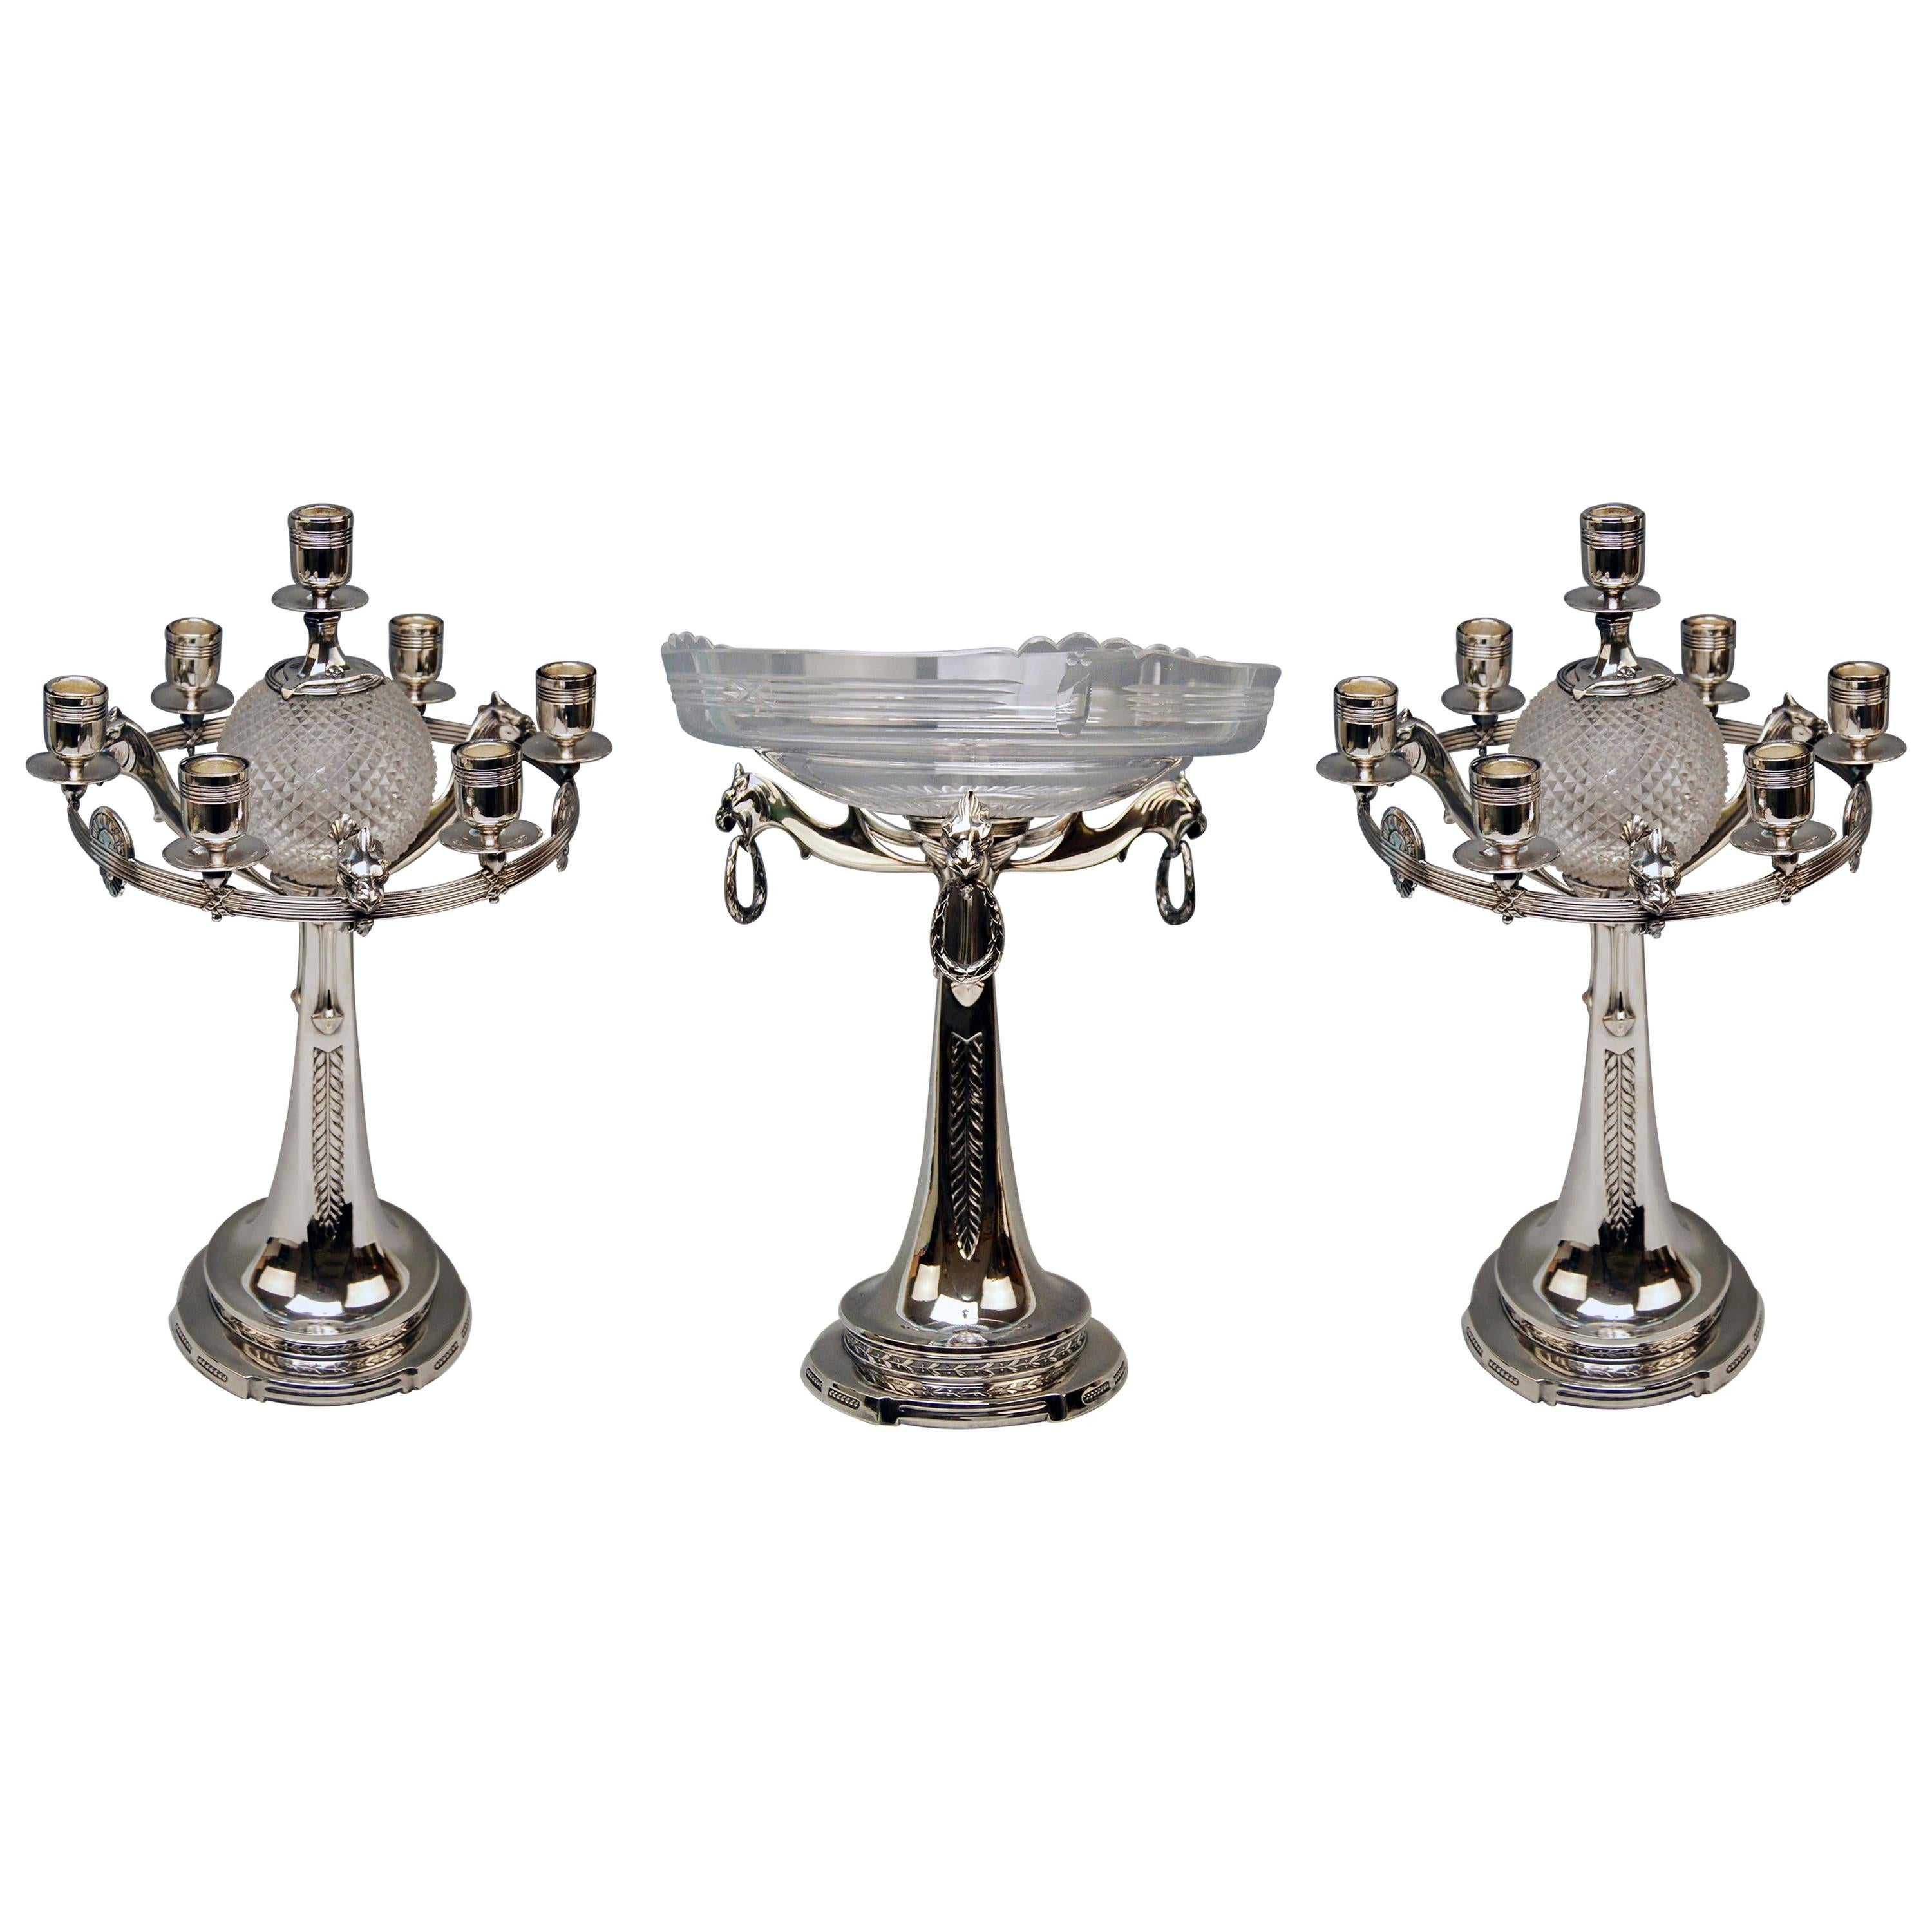 Three-Part Table Set Centerpiece Pair of Candelabras Silver Plated, Germany 1915